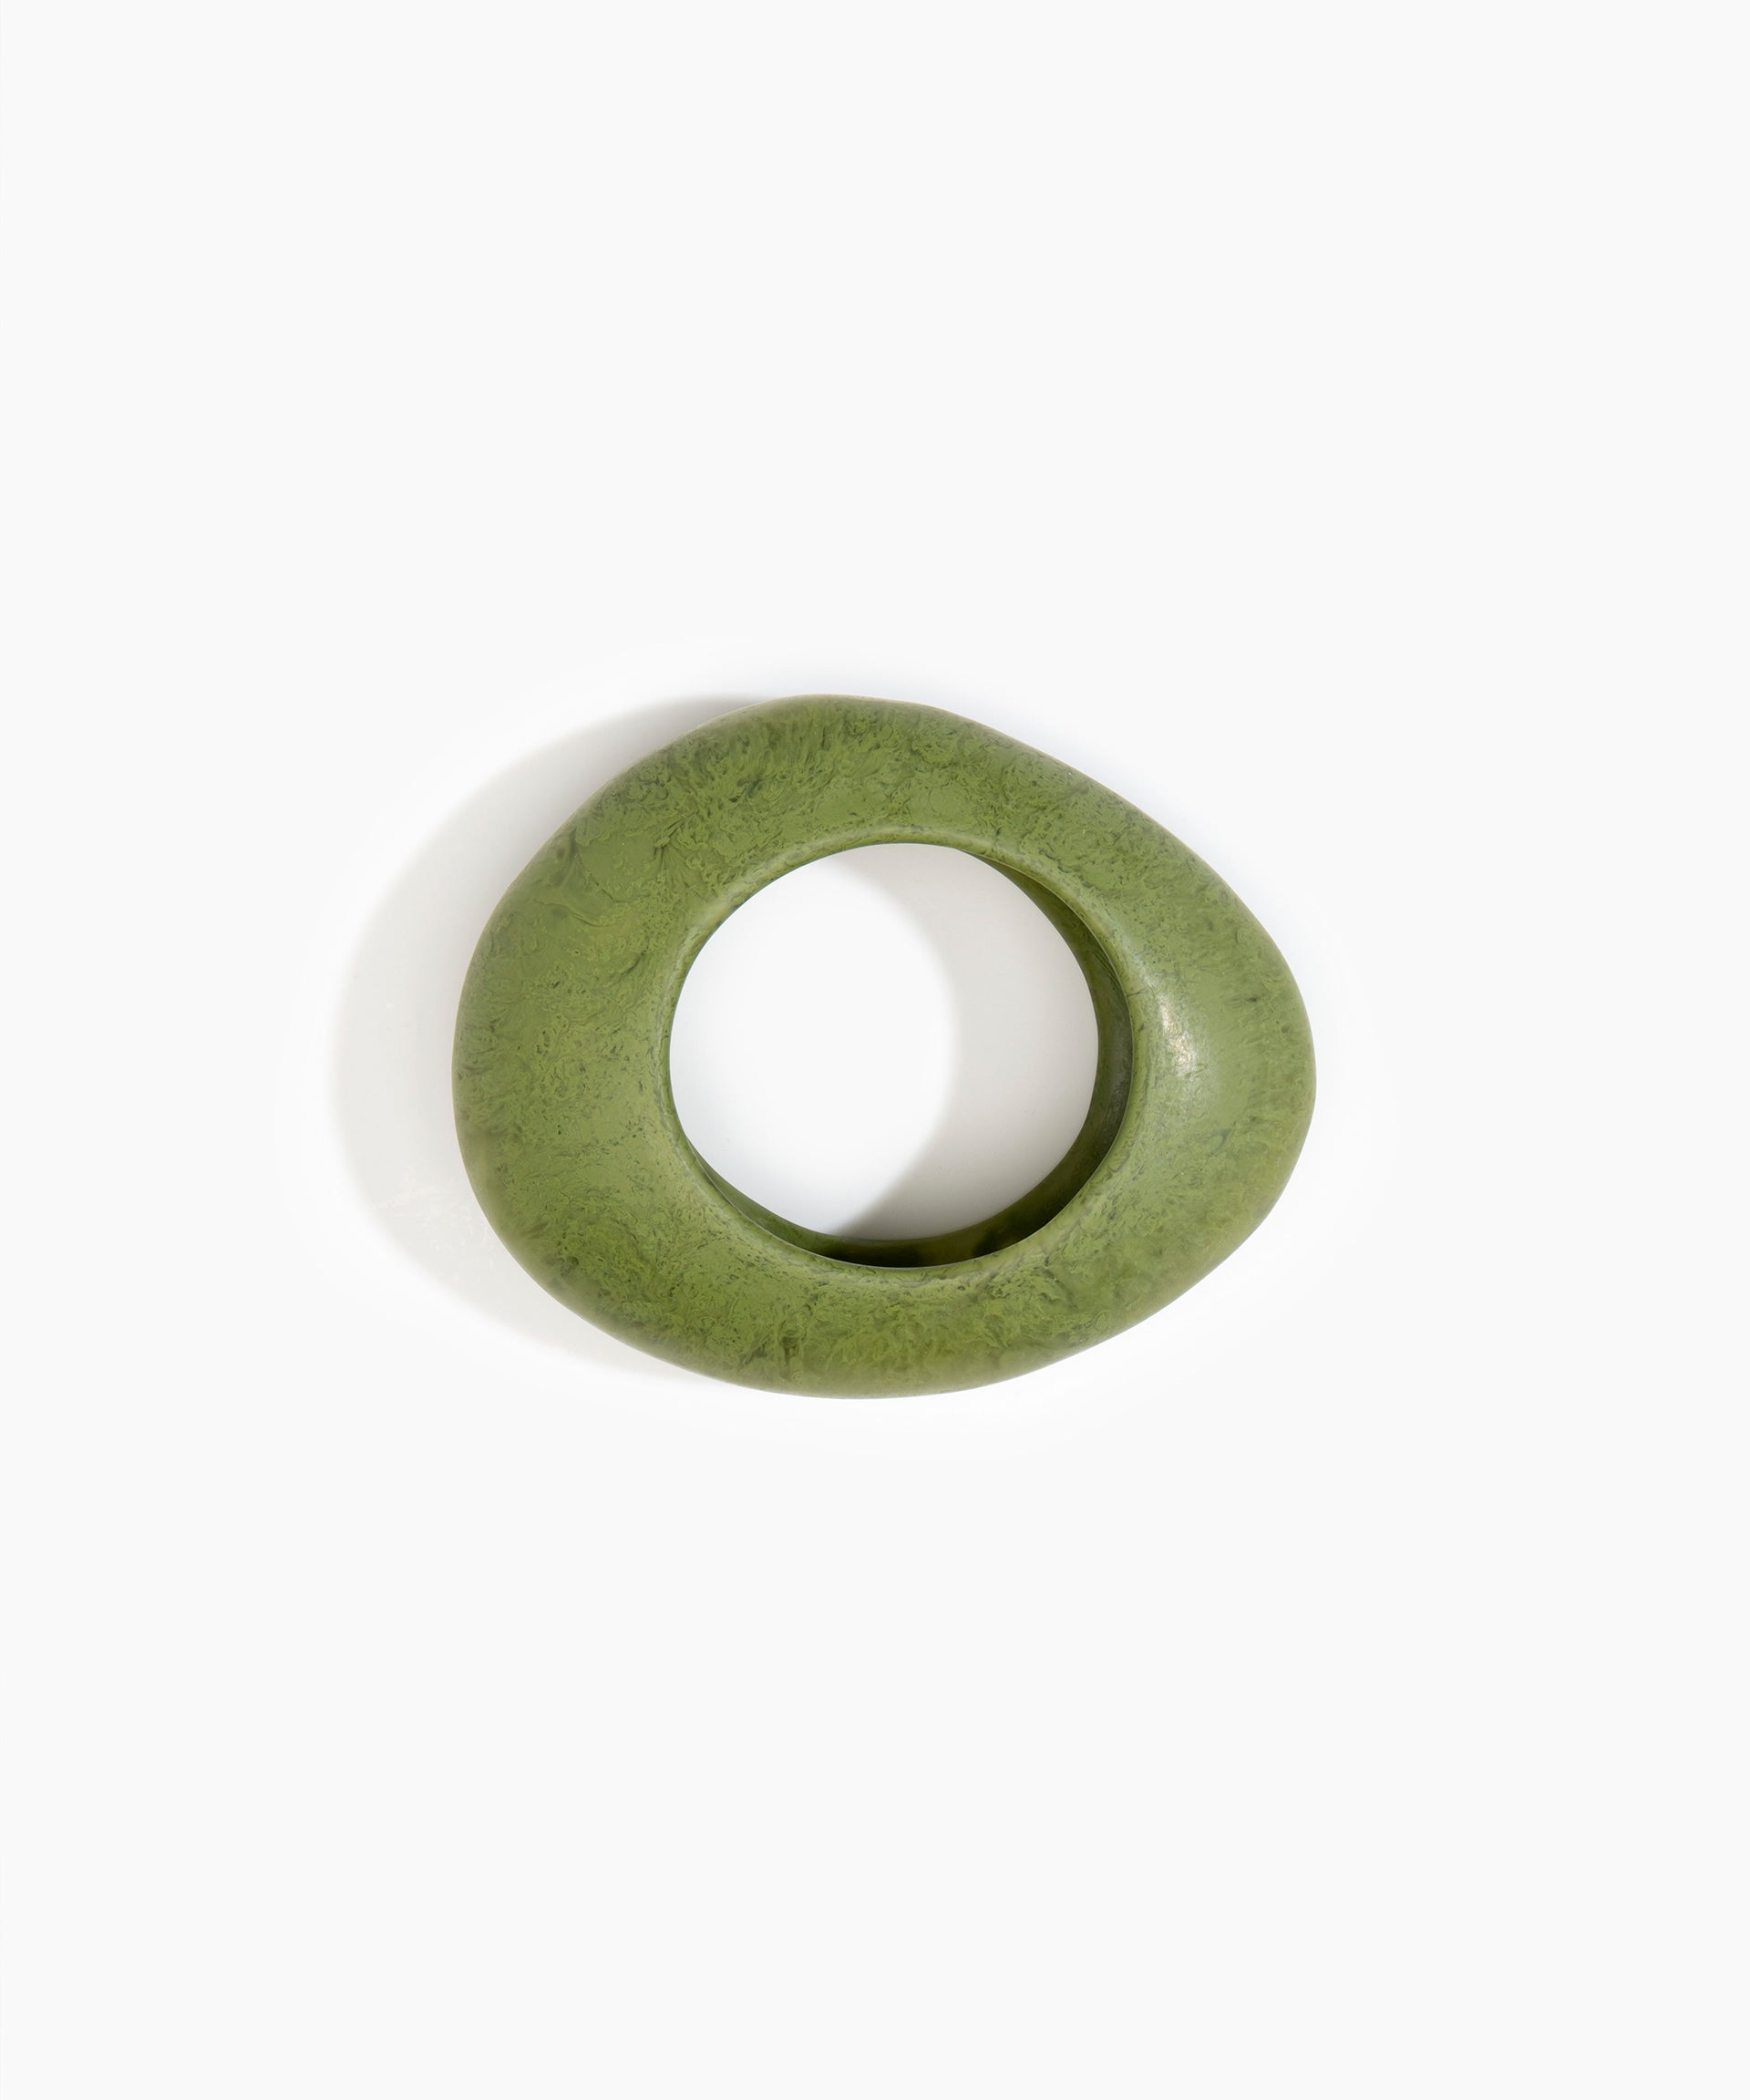 Dinosaur Designs Large Rock Bangle Jewelry in Olive color resin with Regular Fit